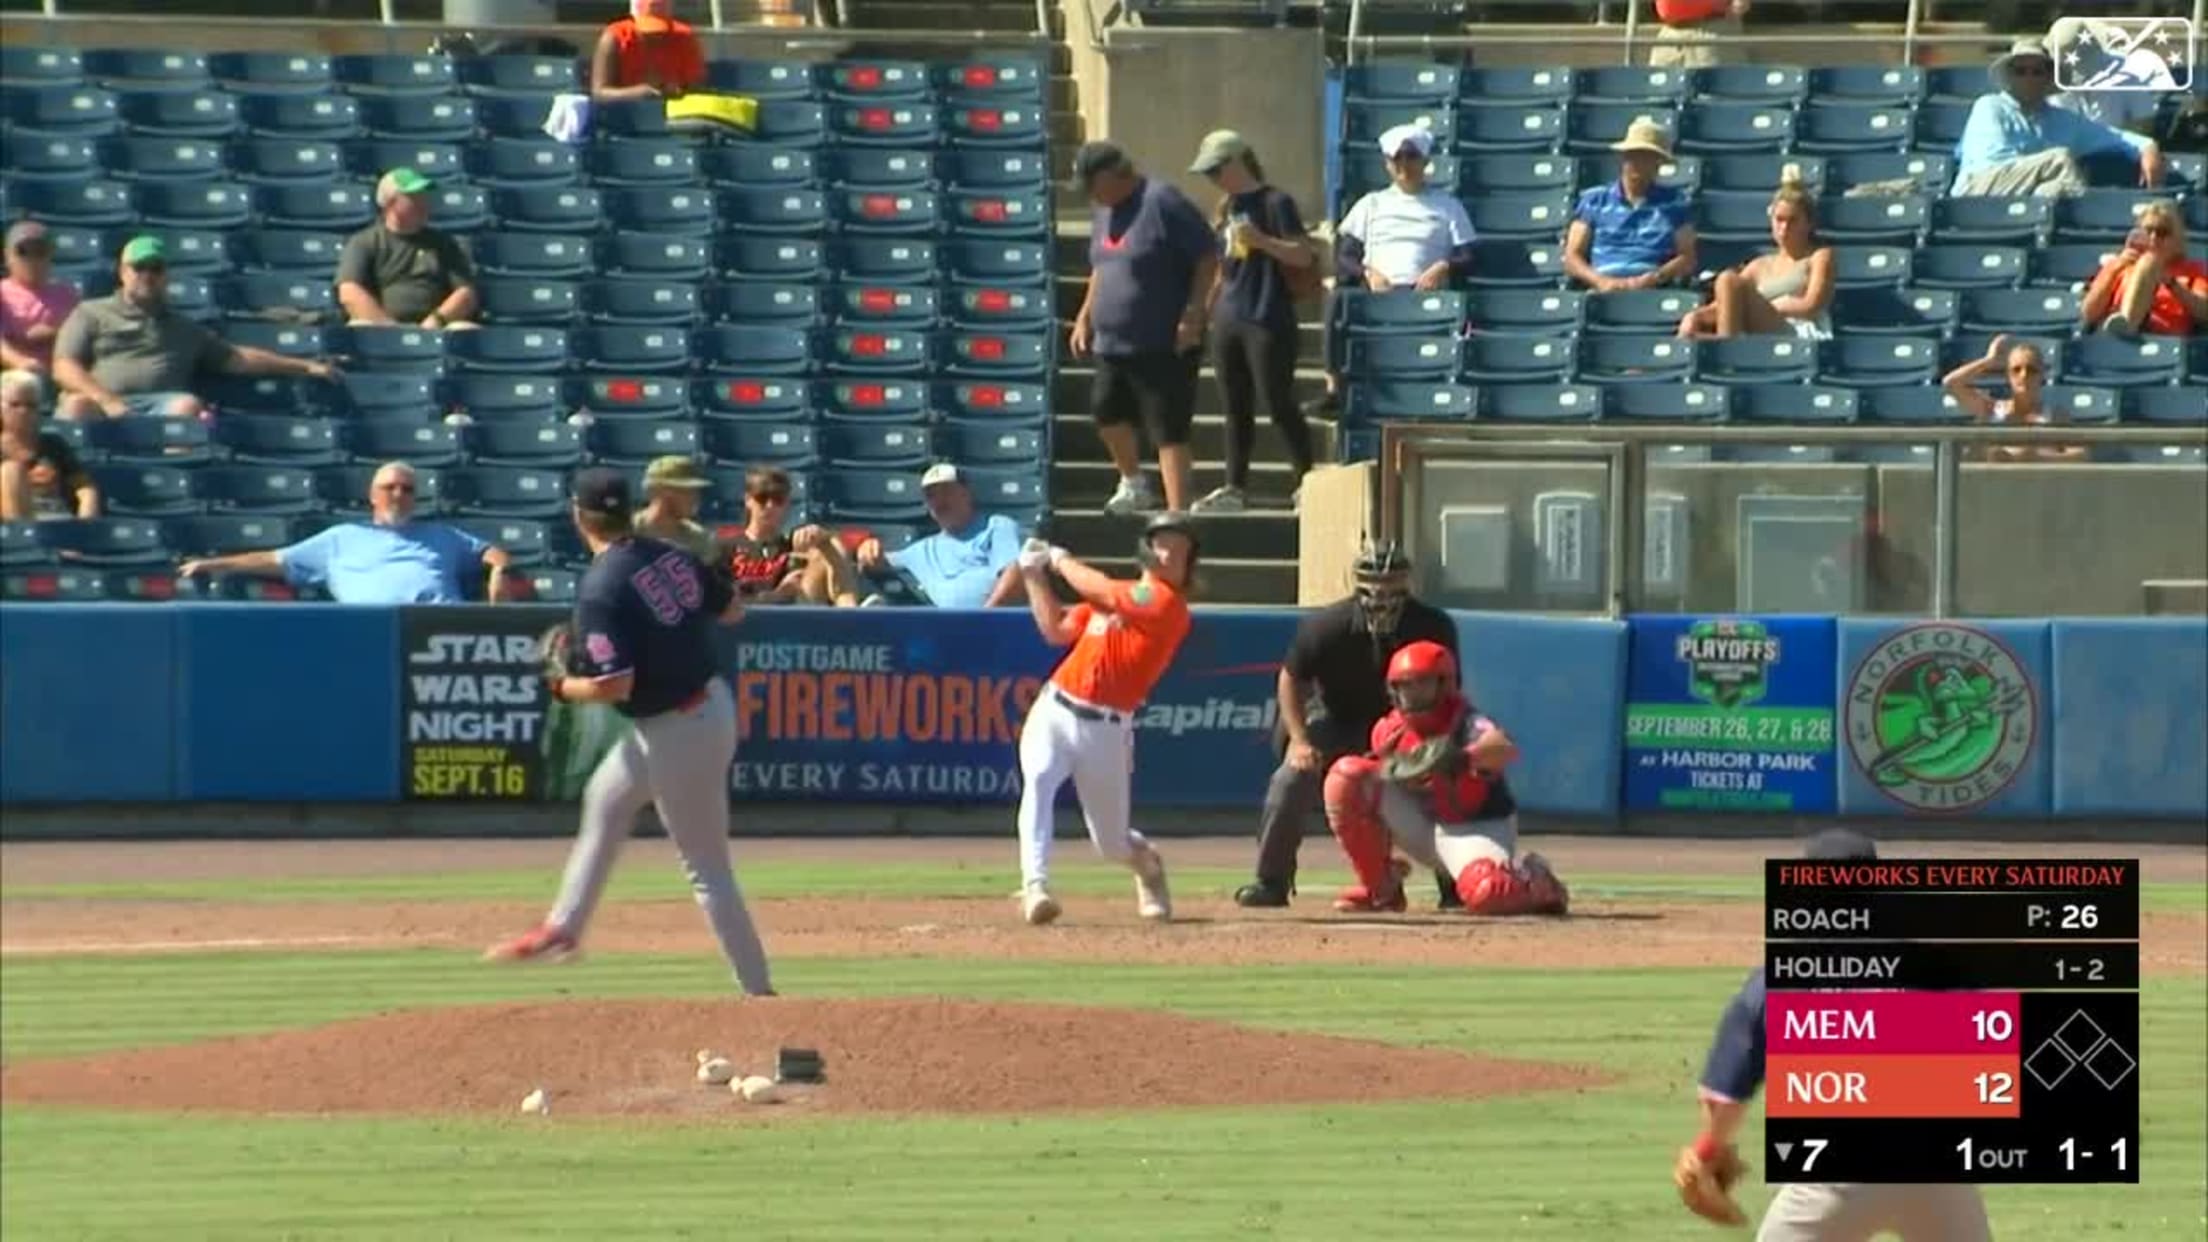 Jackson Holliday's booming double